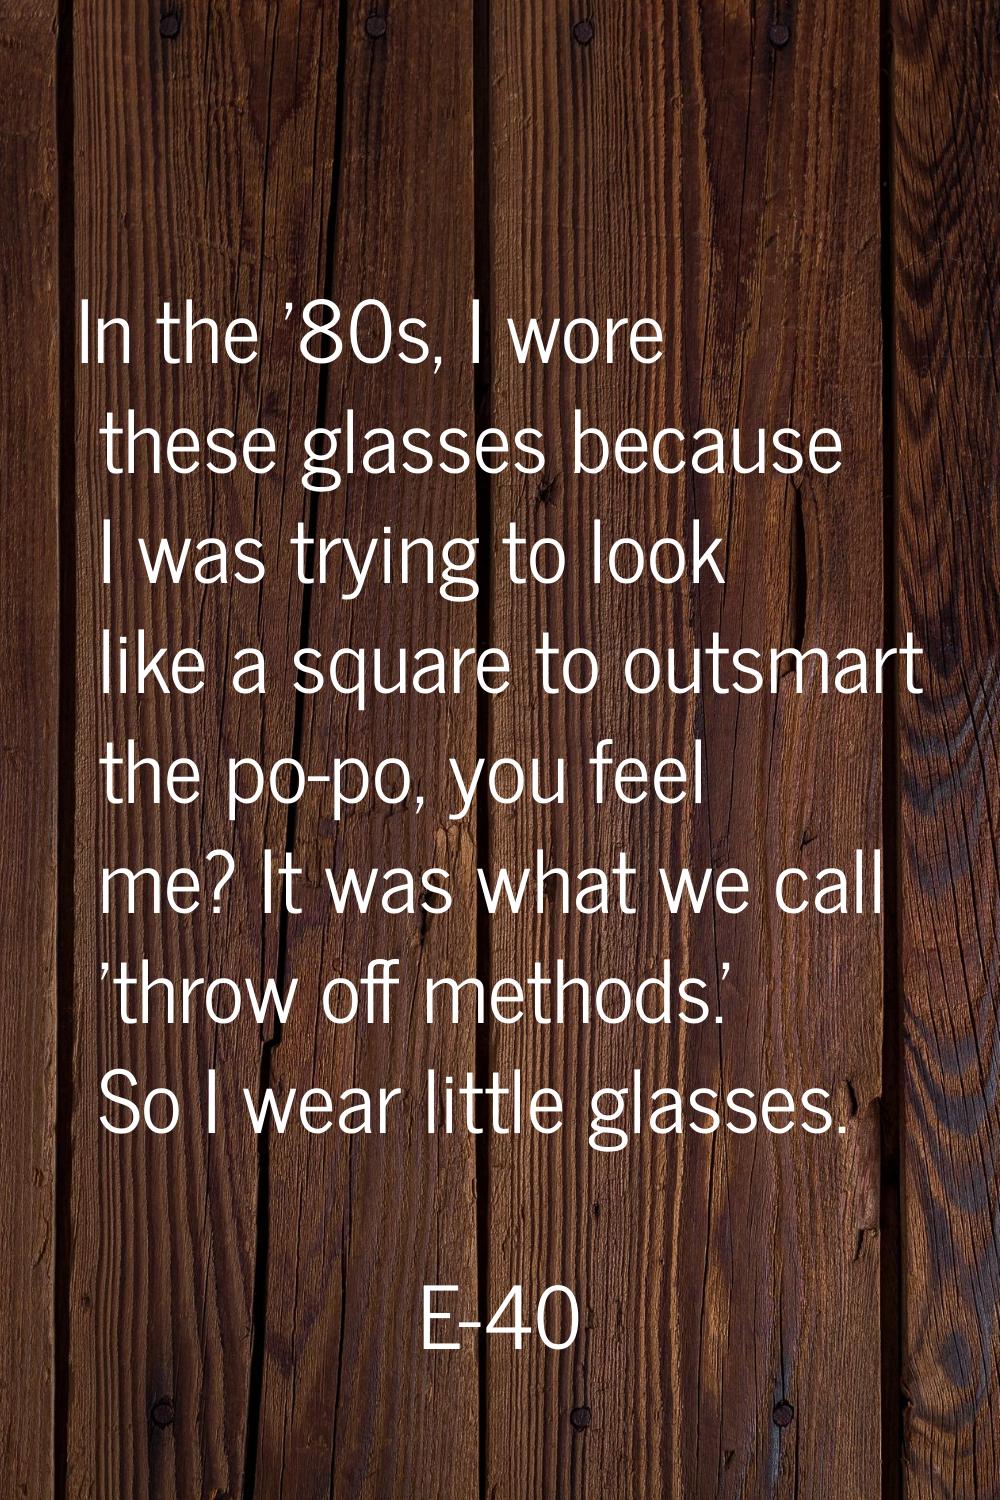 In the '80s, I wore these glasses because I was trying to look like a square to outsmart the po-po,